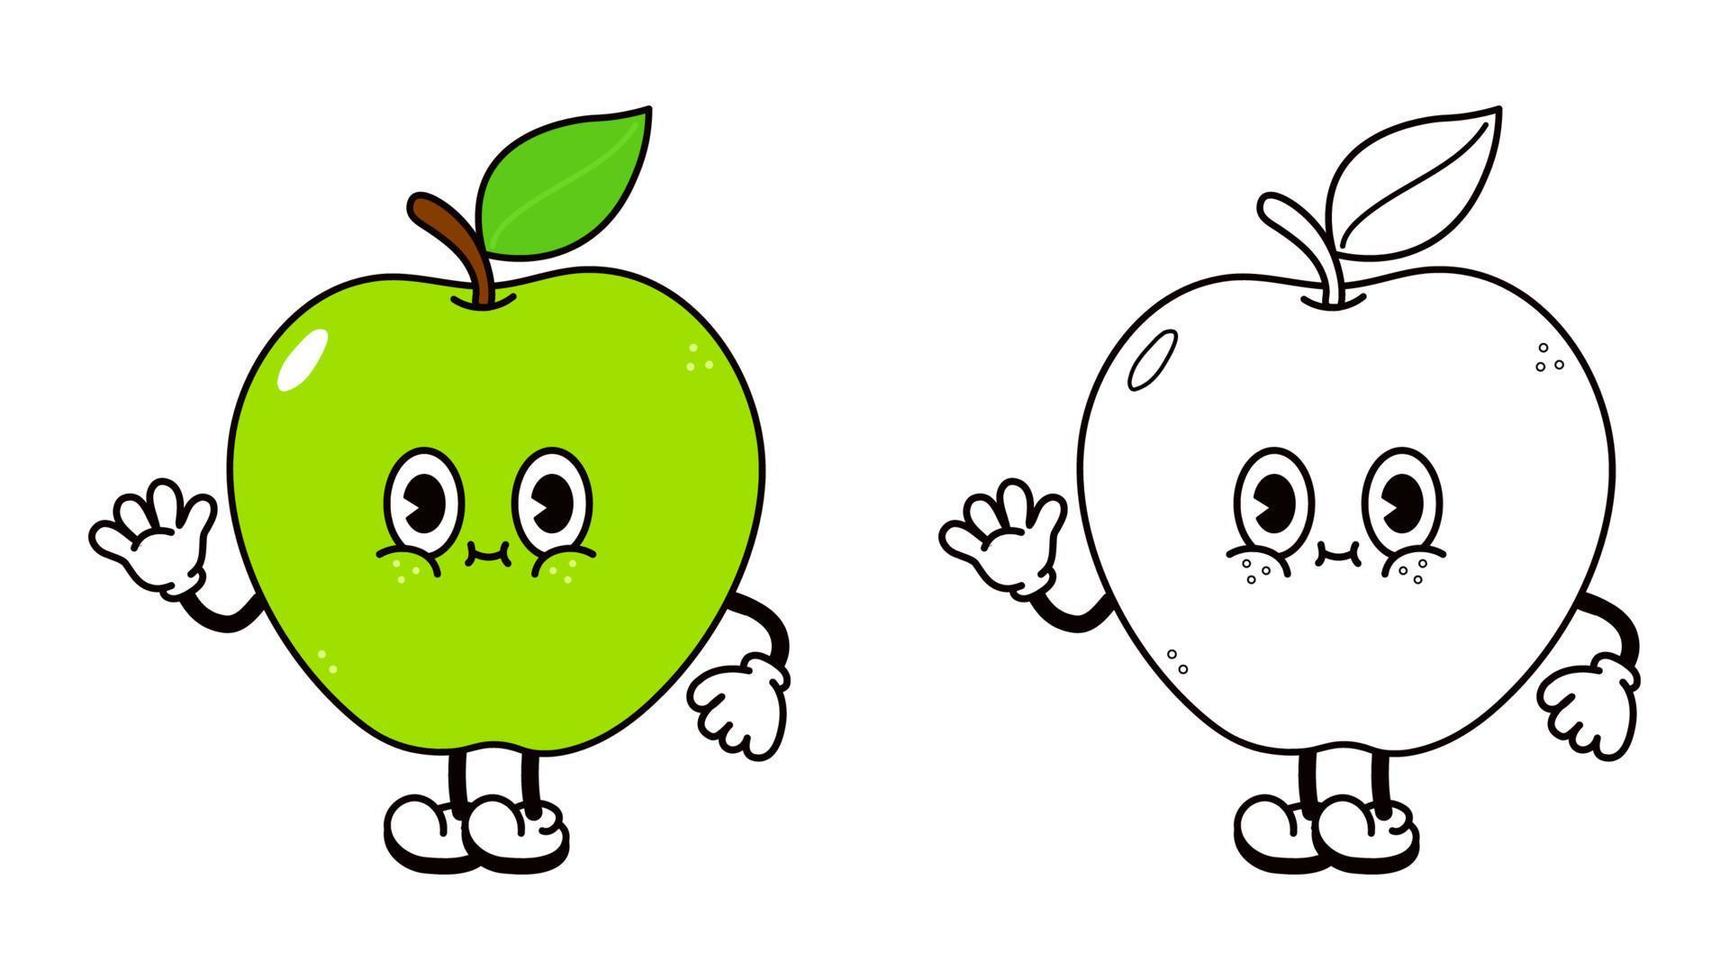 Cute funny green apple waving hand character outline cartoon illustration for coloring book. Vector green apple hand drawn traditional cartoon vintage, retro, character. Isolated on white background